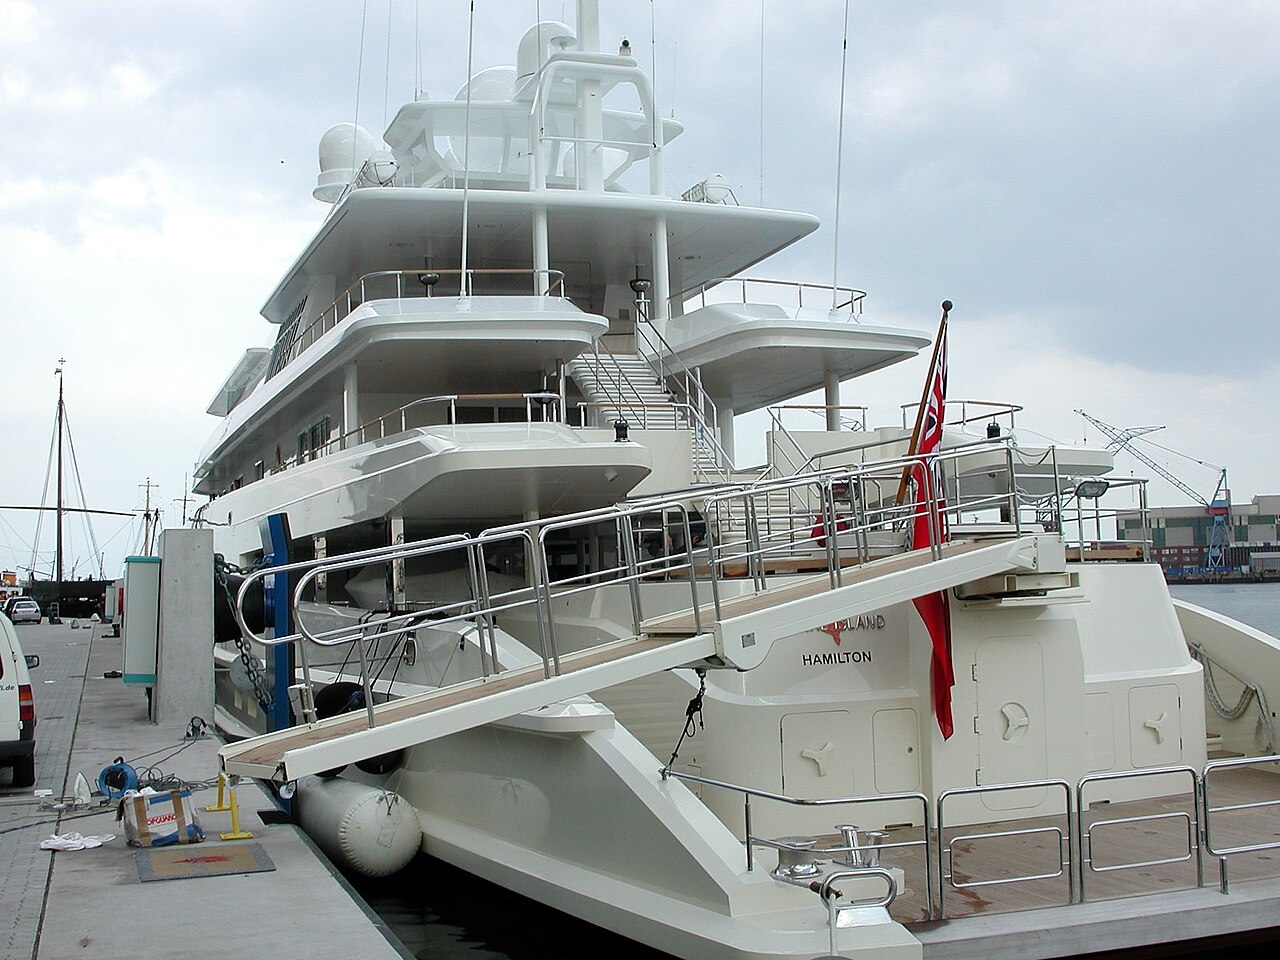 <p>The commissioner of <em>Come Together</em> is a fan of The Beatles, so obviously they're a person of discerning tastes. One look at the unique, modern exterior of this superyacht is proof enough of that.</p>